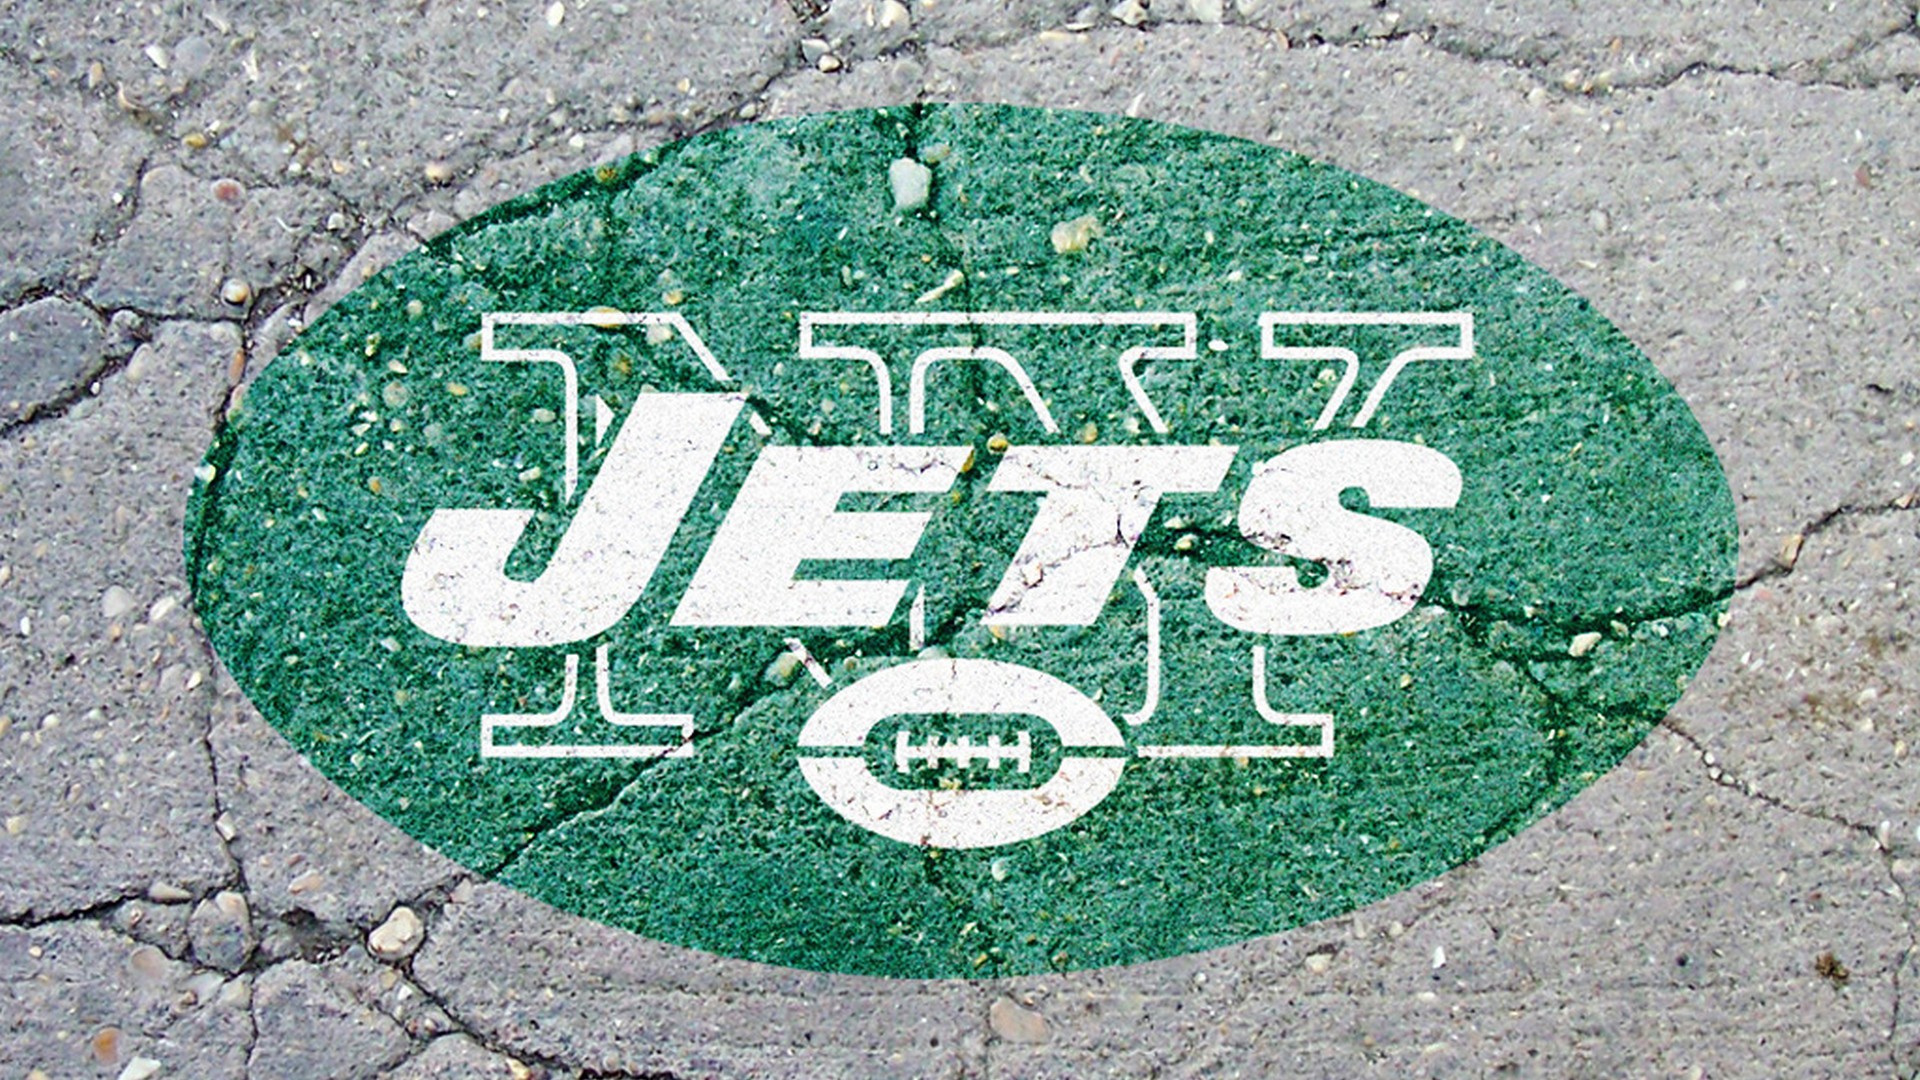 HD New York Jets Backgrounds With Resolution 1920X1080 pixel. You can make this wallpaper for your Mac or Windows Desktop Background, iPhone, Android or Tablet and another Smartphone device for free